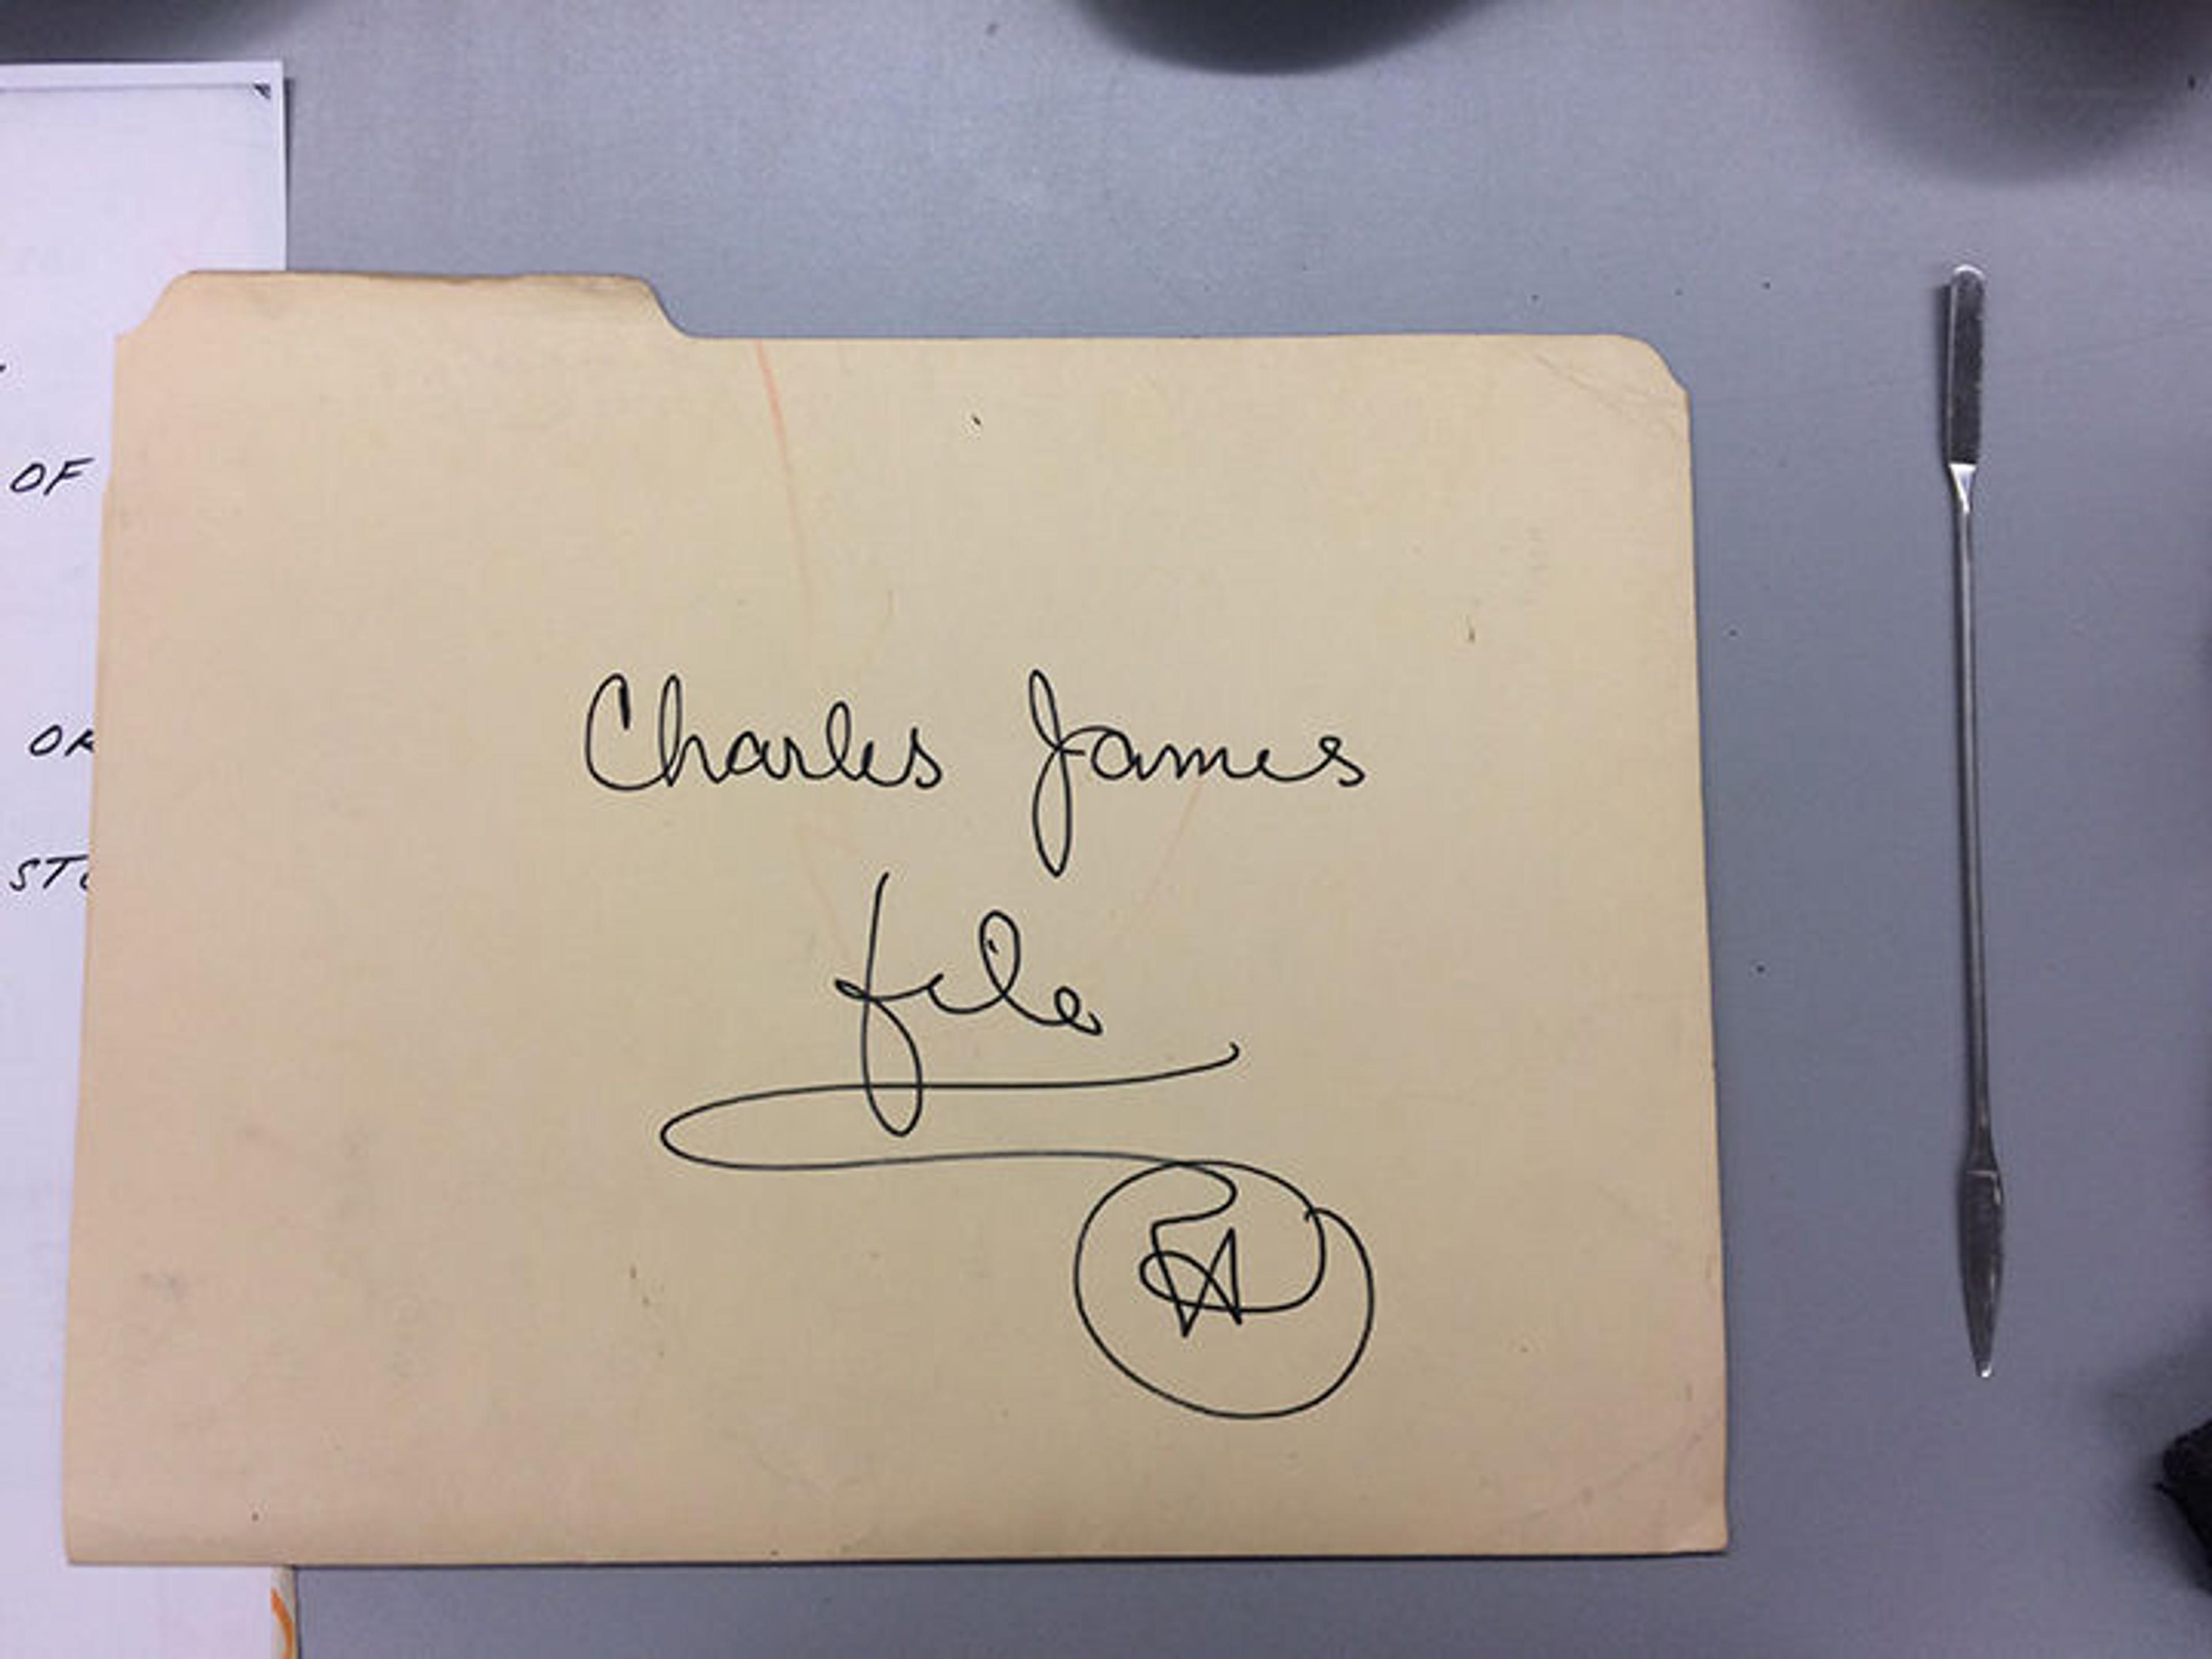 Charles James Archives 7